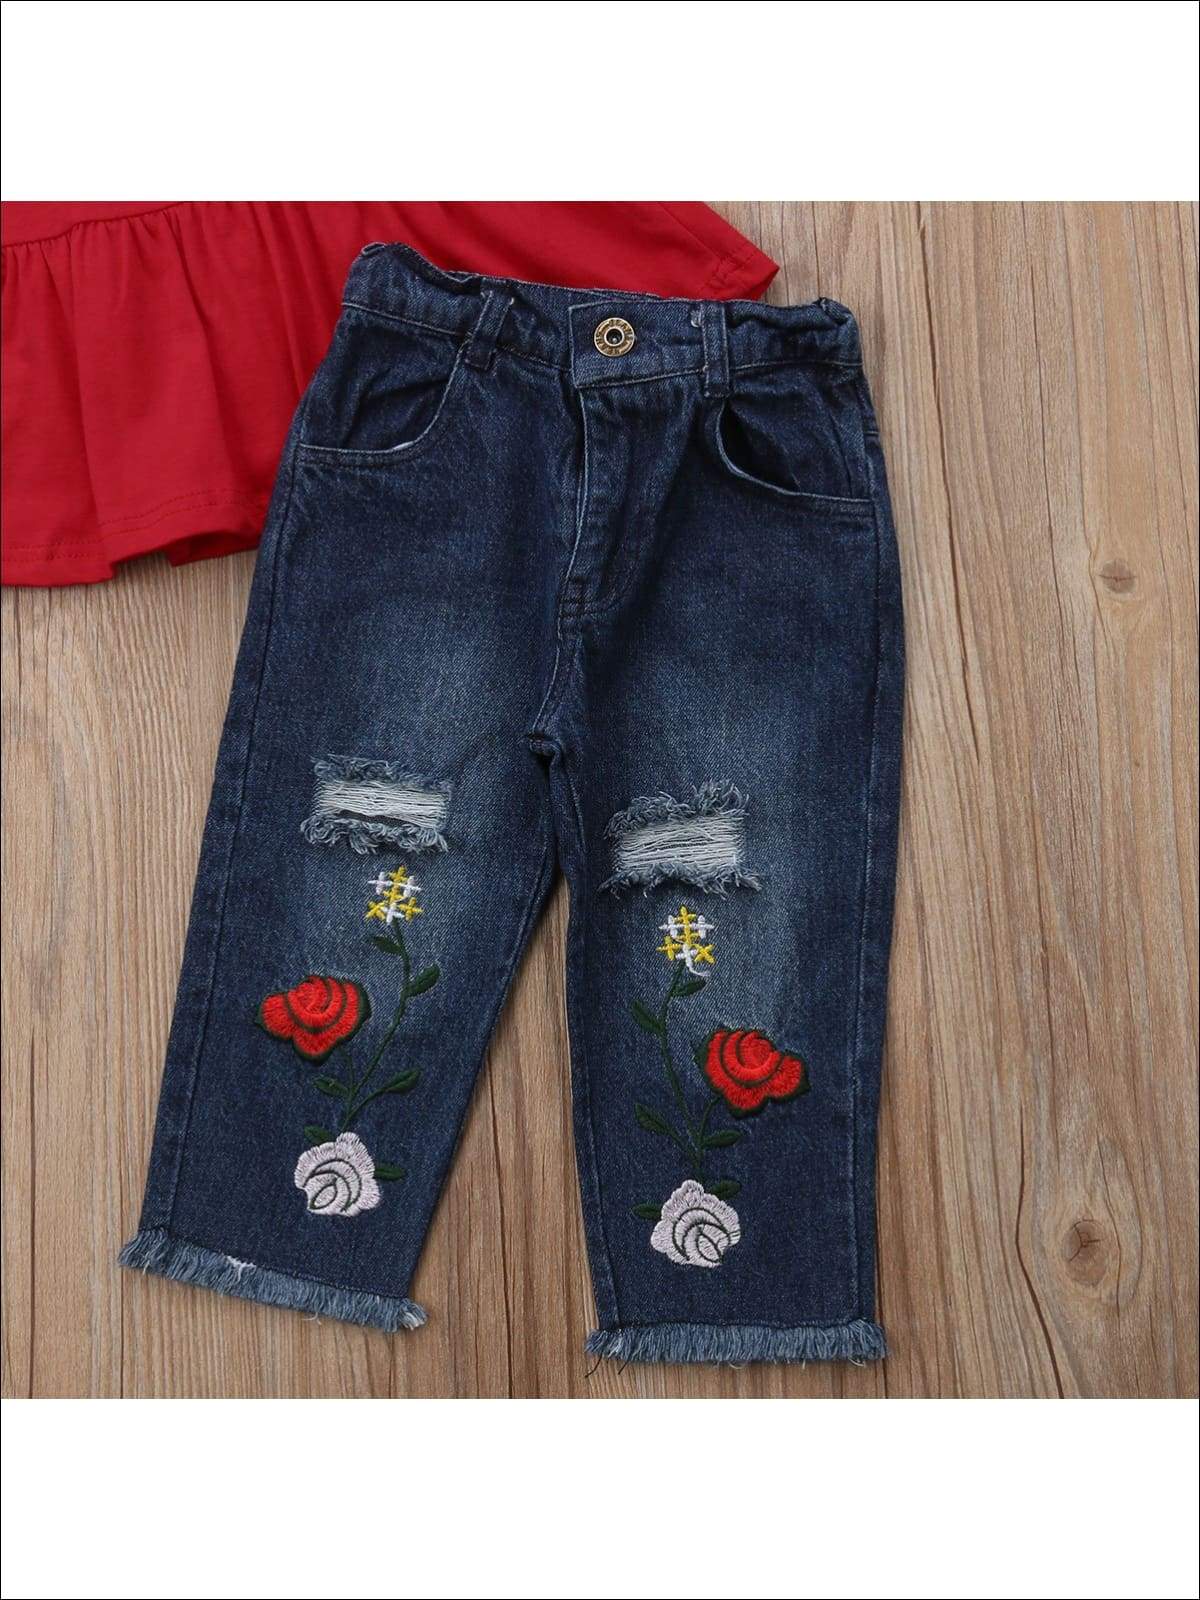 Girls Red Ruffled Sleeve Top & Rose Applique Distressed Jeans Set - Girls Fall Casual Set